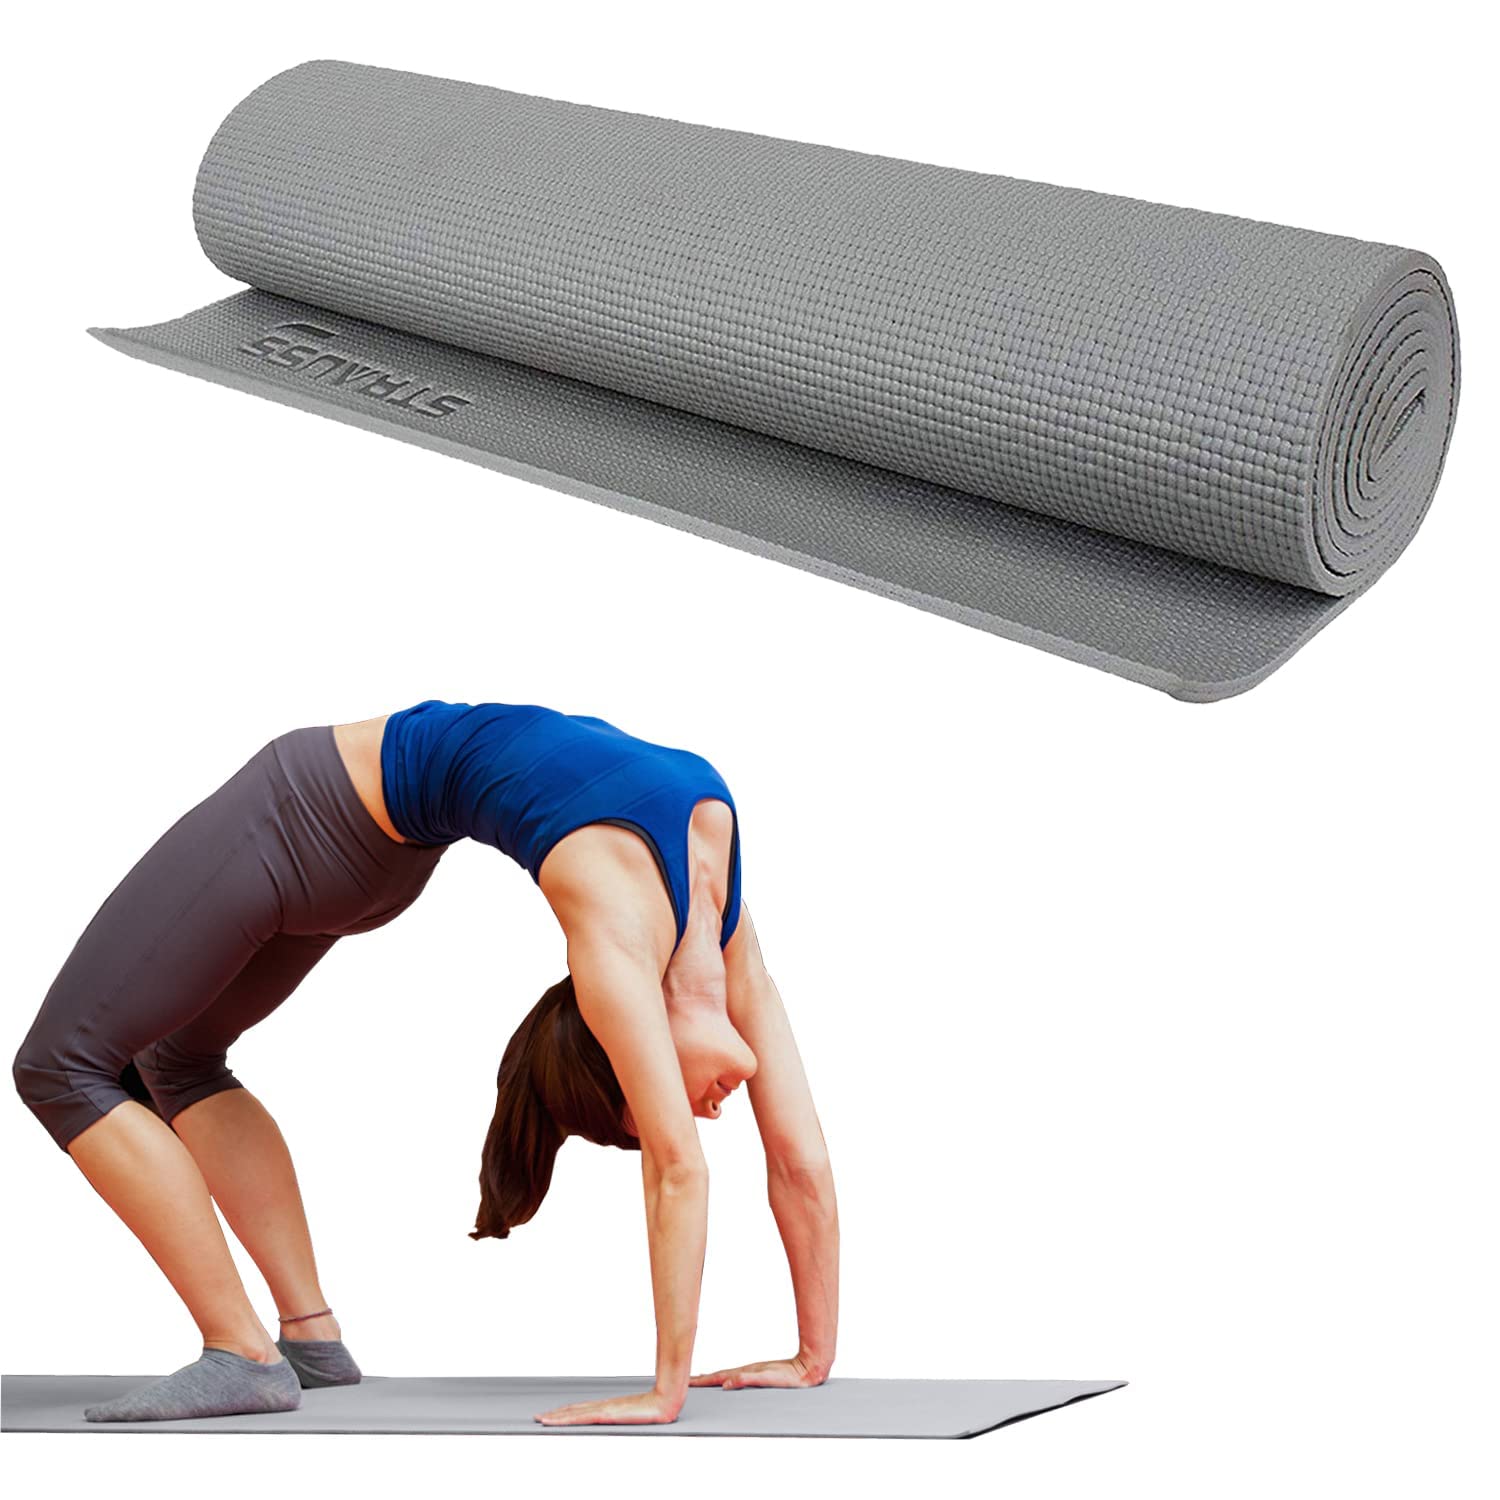 Strauss Extra Thick Yoga Mat with Carrying Strap|Exercise mat|13 mm